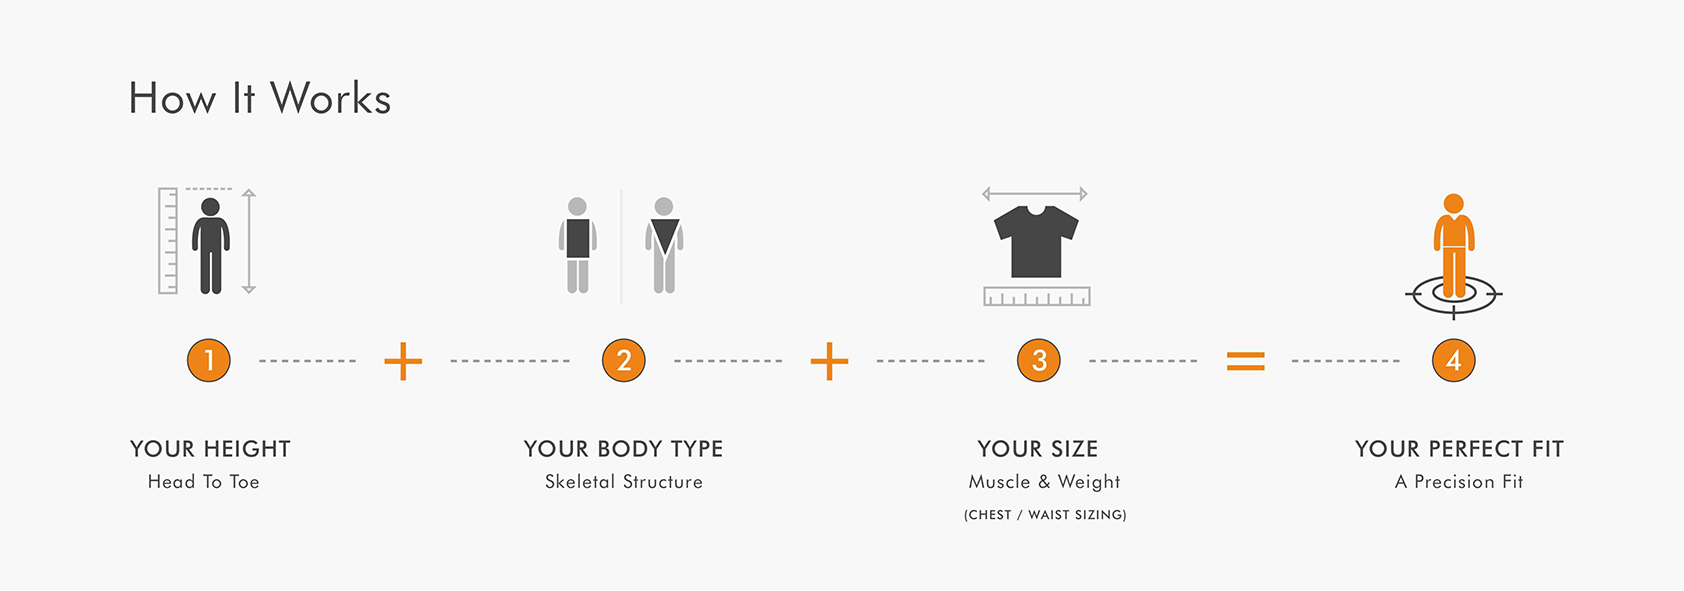 otero menswear clothing chart and how the shirts and polos fit - how it works